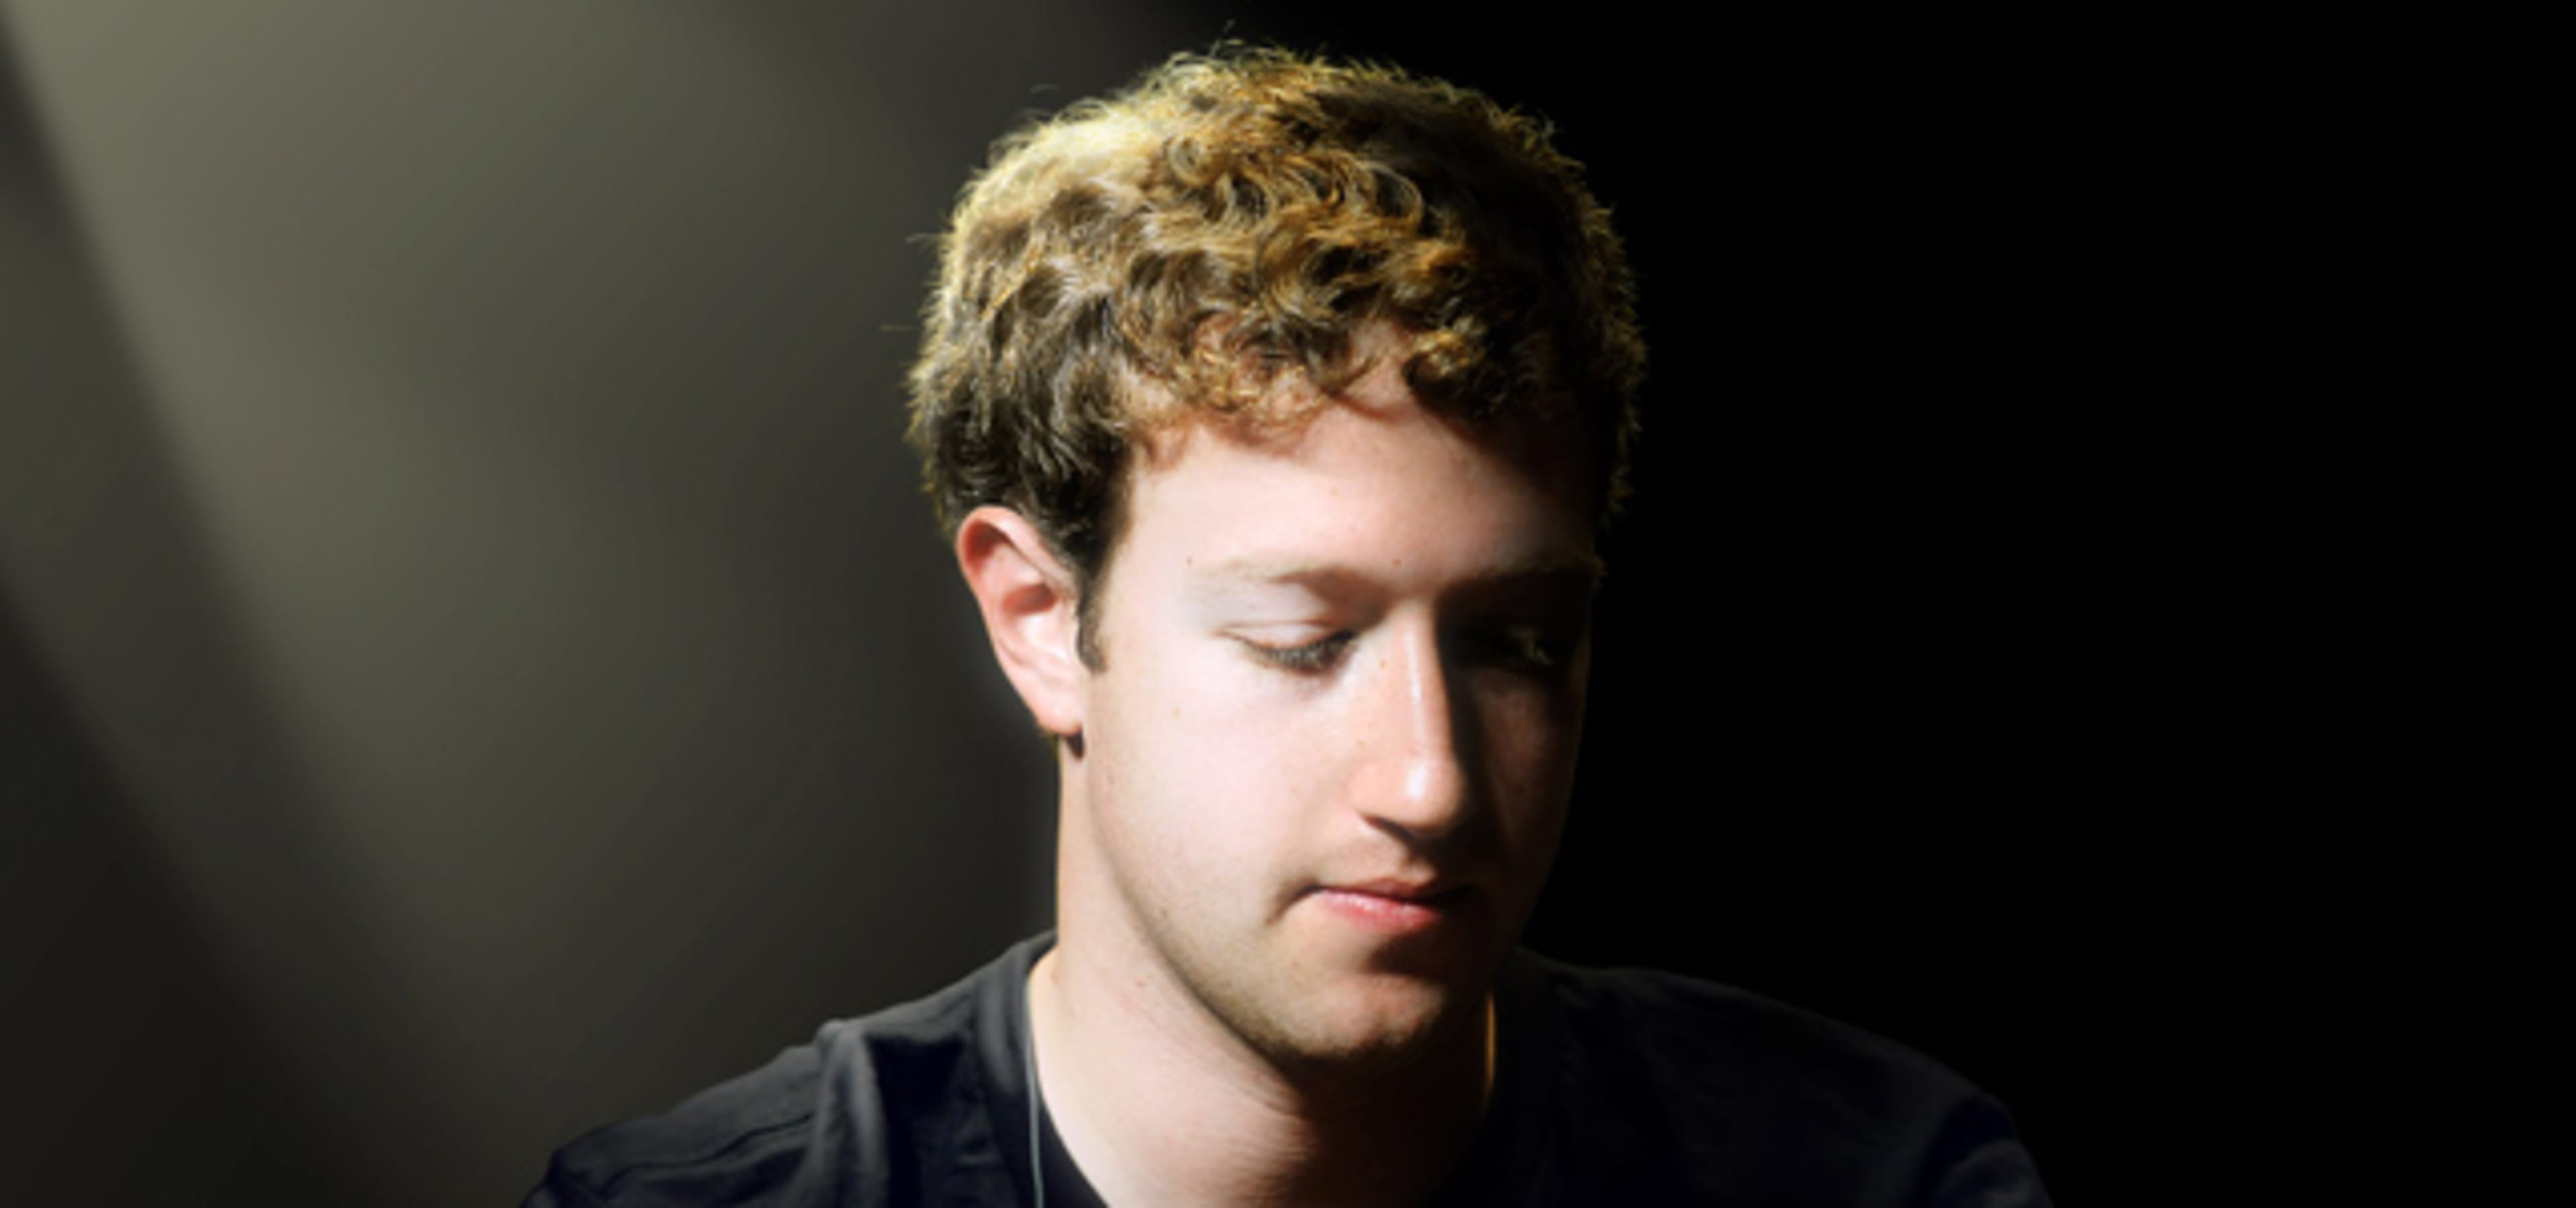 “Boy CEO” Mark Zuckerberg’s Two Smartest Projects Were Growing Facebook And Growing Up